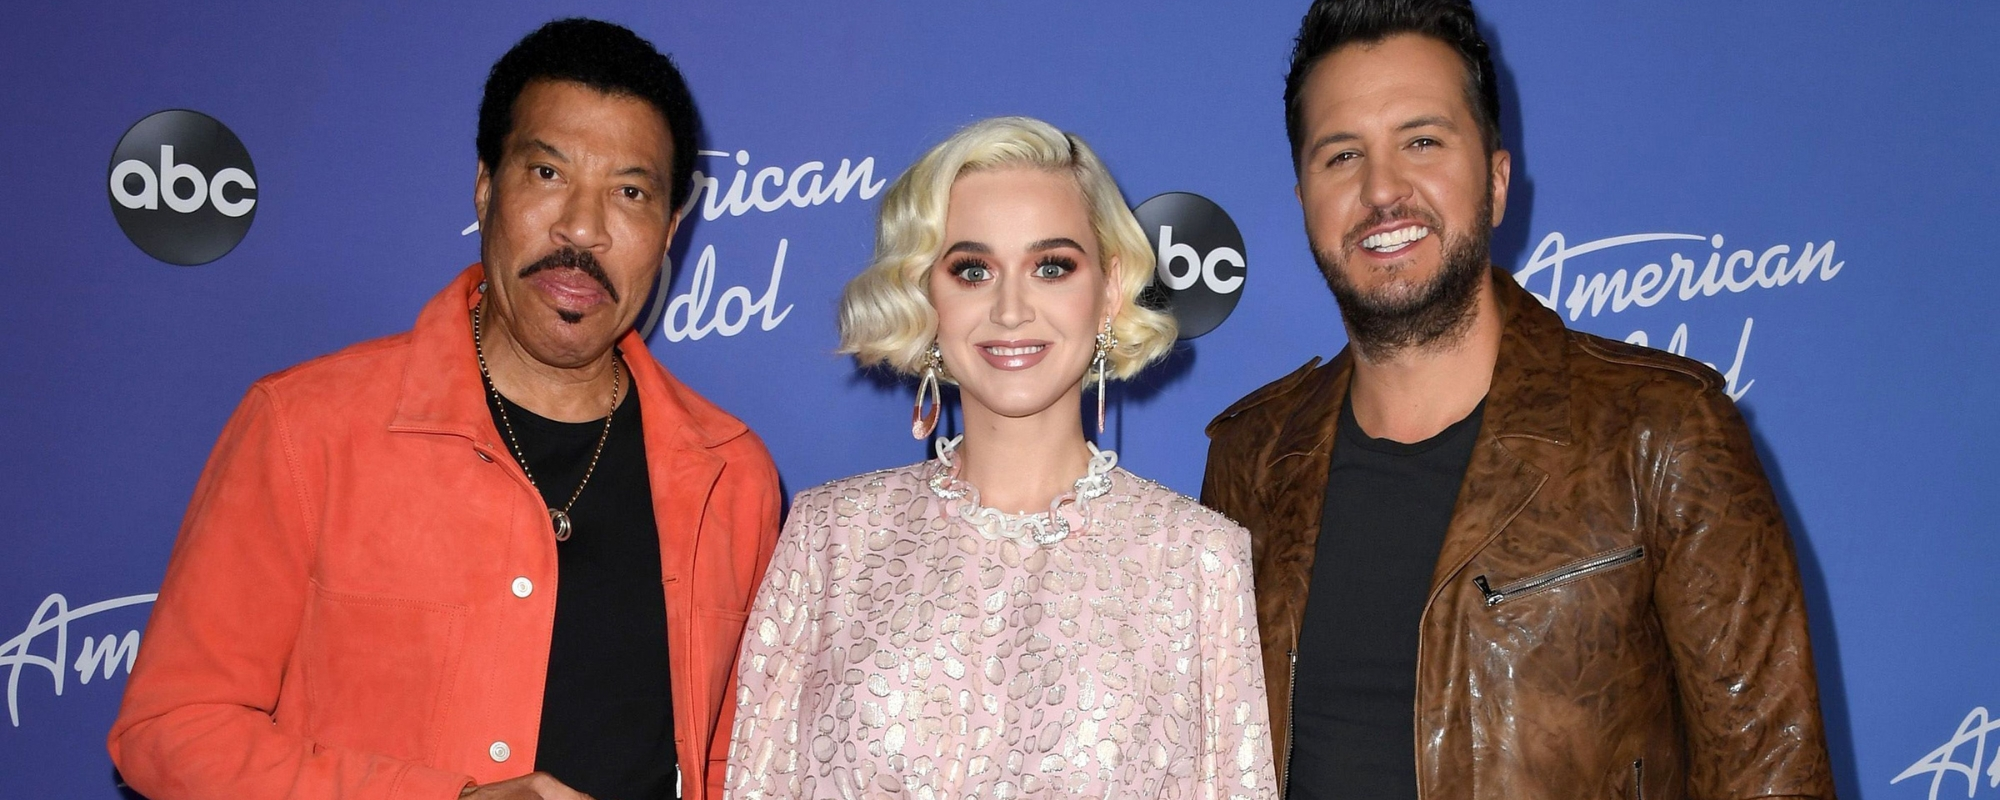 Is There a New Episode of ‘American Idol’ Tonight? How to Watch the Season 22 Premiere